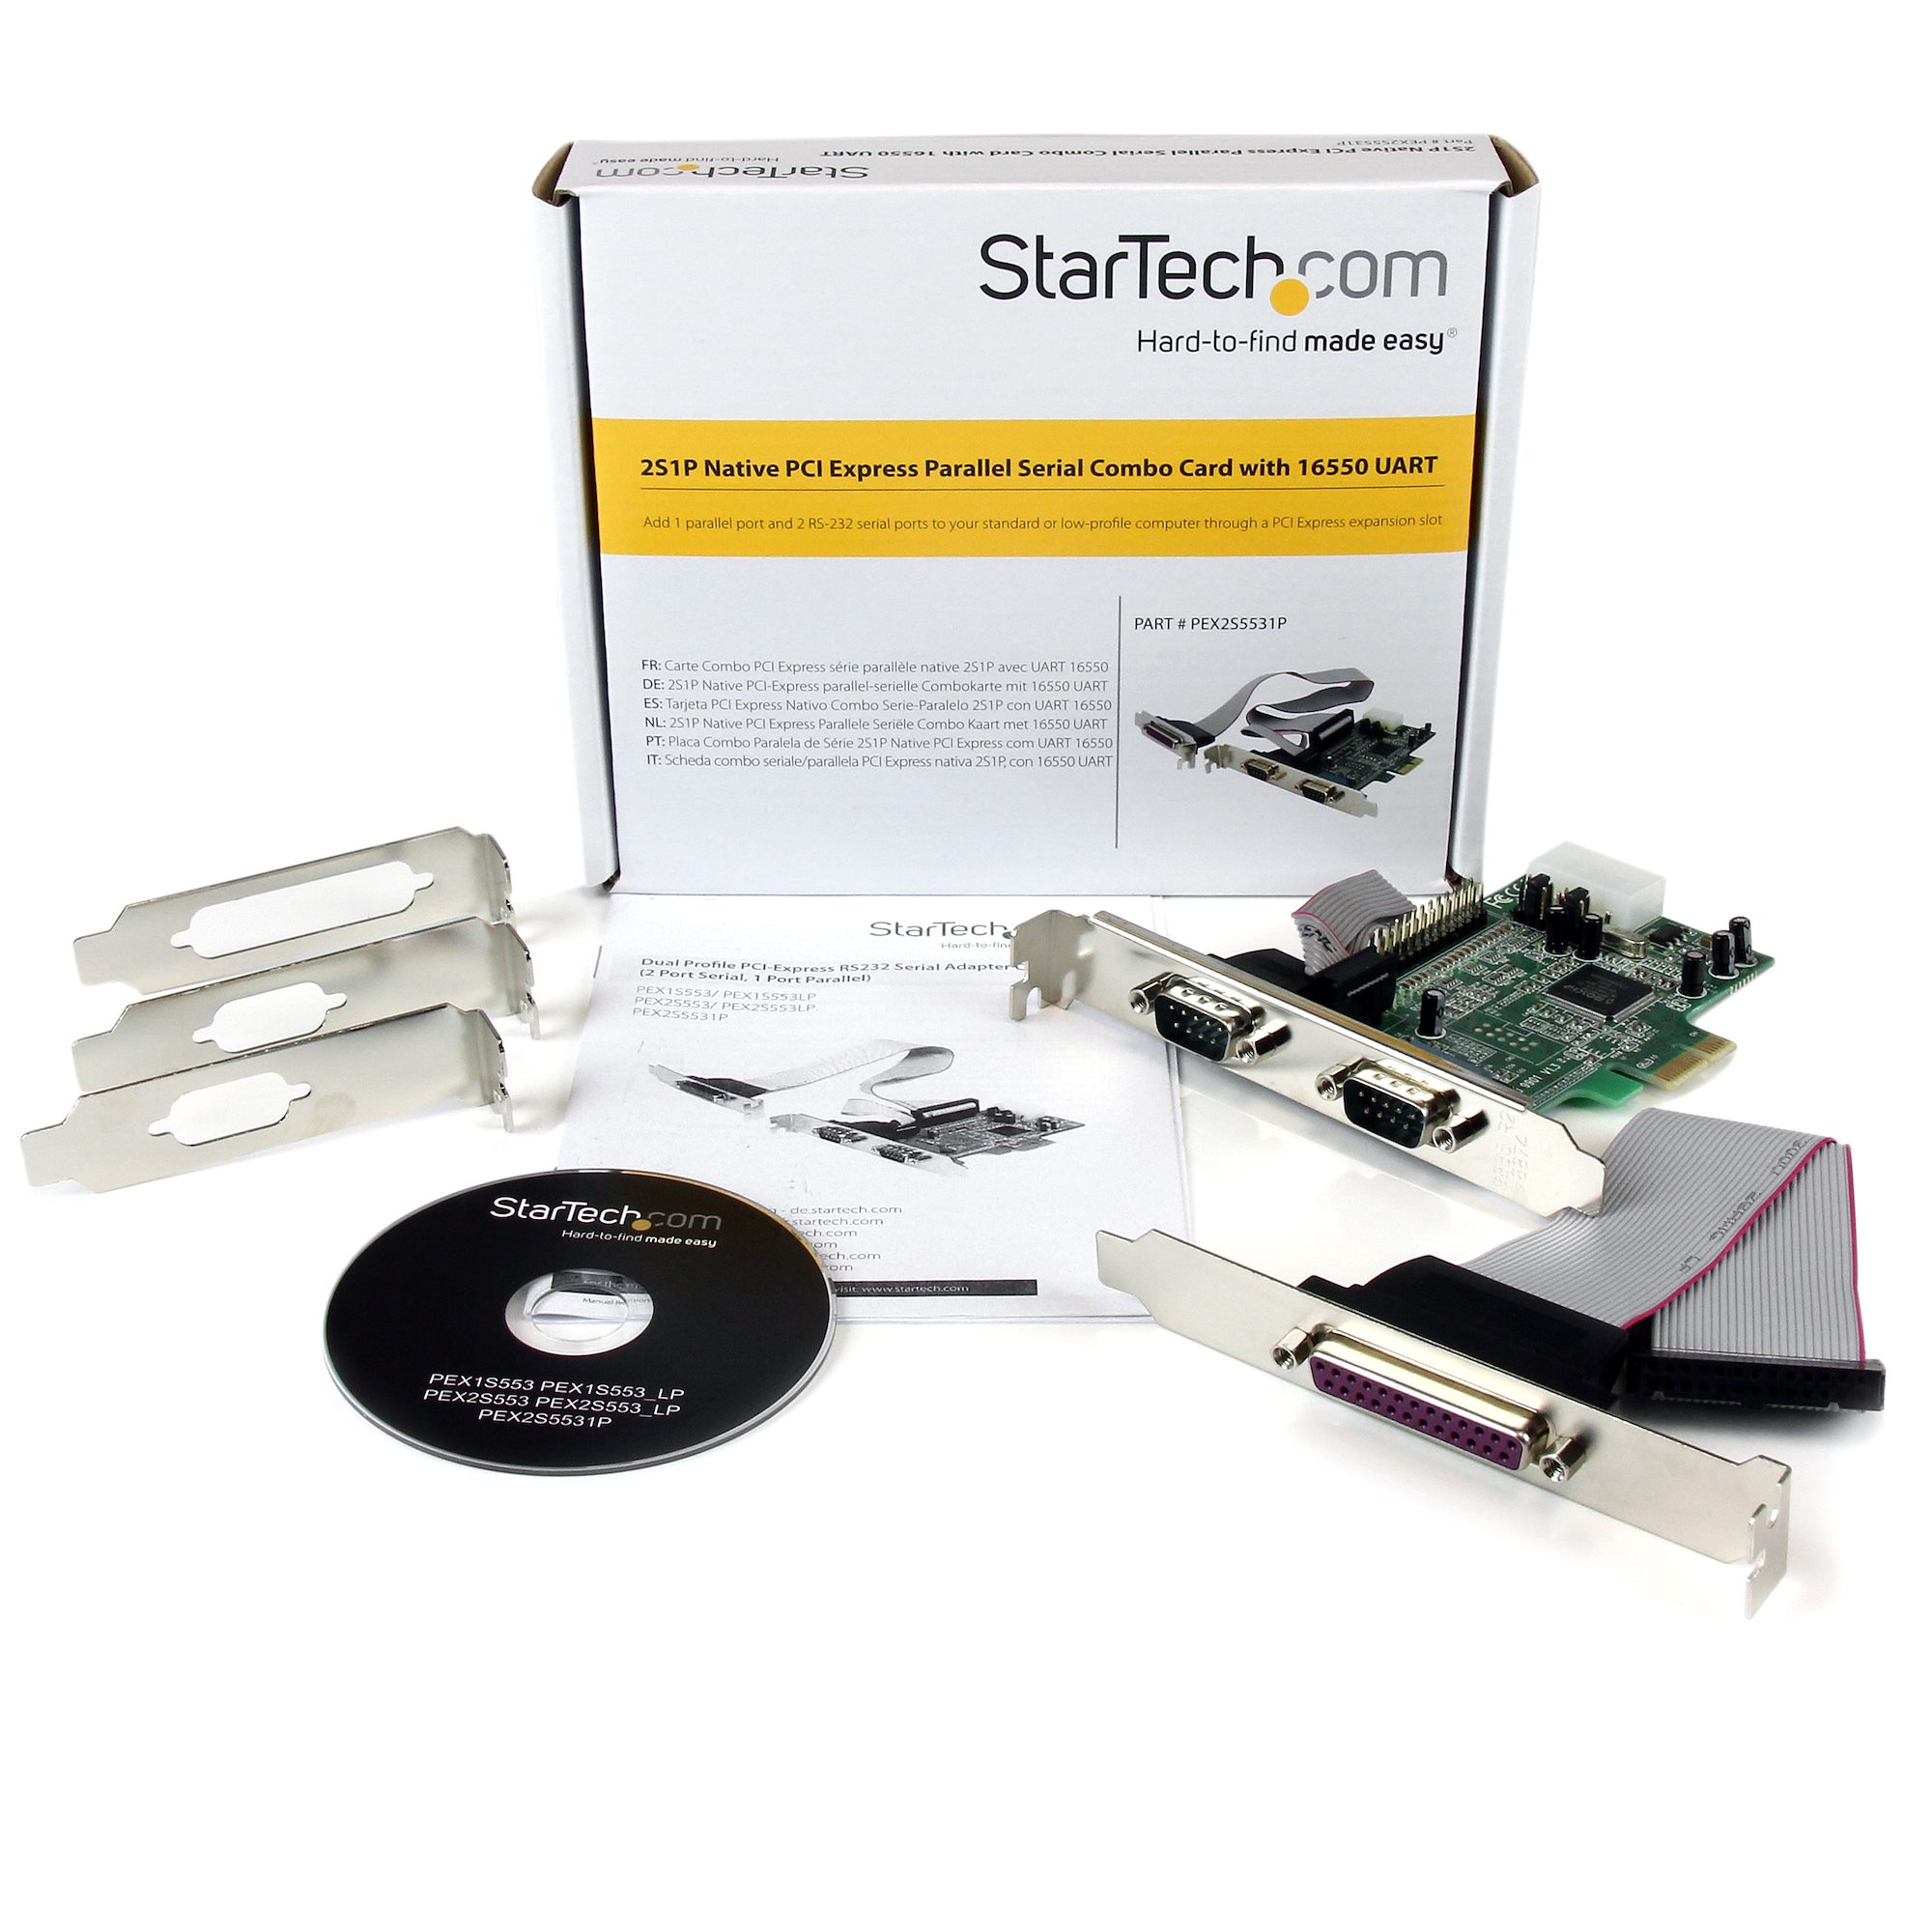 Serial Parallel PCI IEEE 1284 Card PCI Serial Adapter StarTech.com 2S1P PCI Serial Parallel Combo Card with 16550 UART 